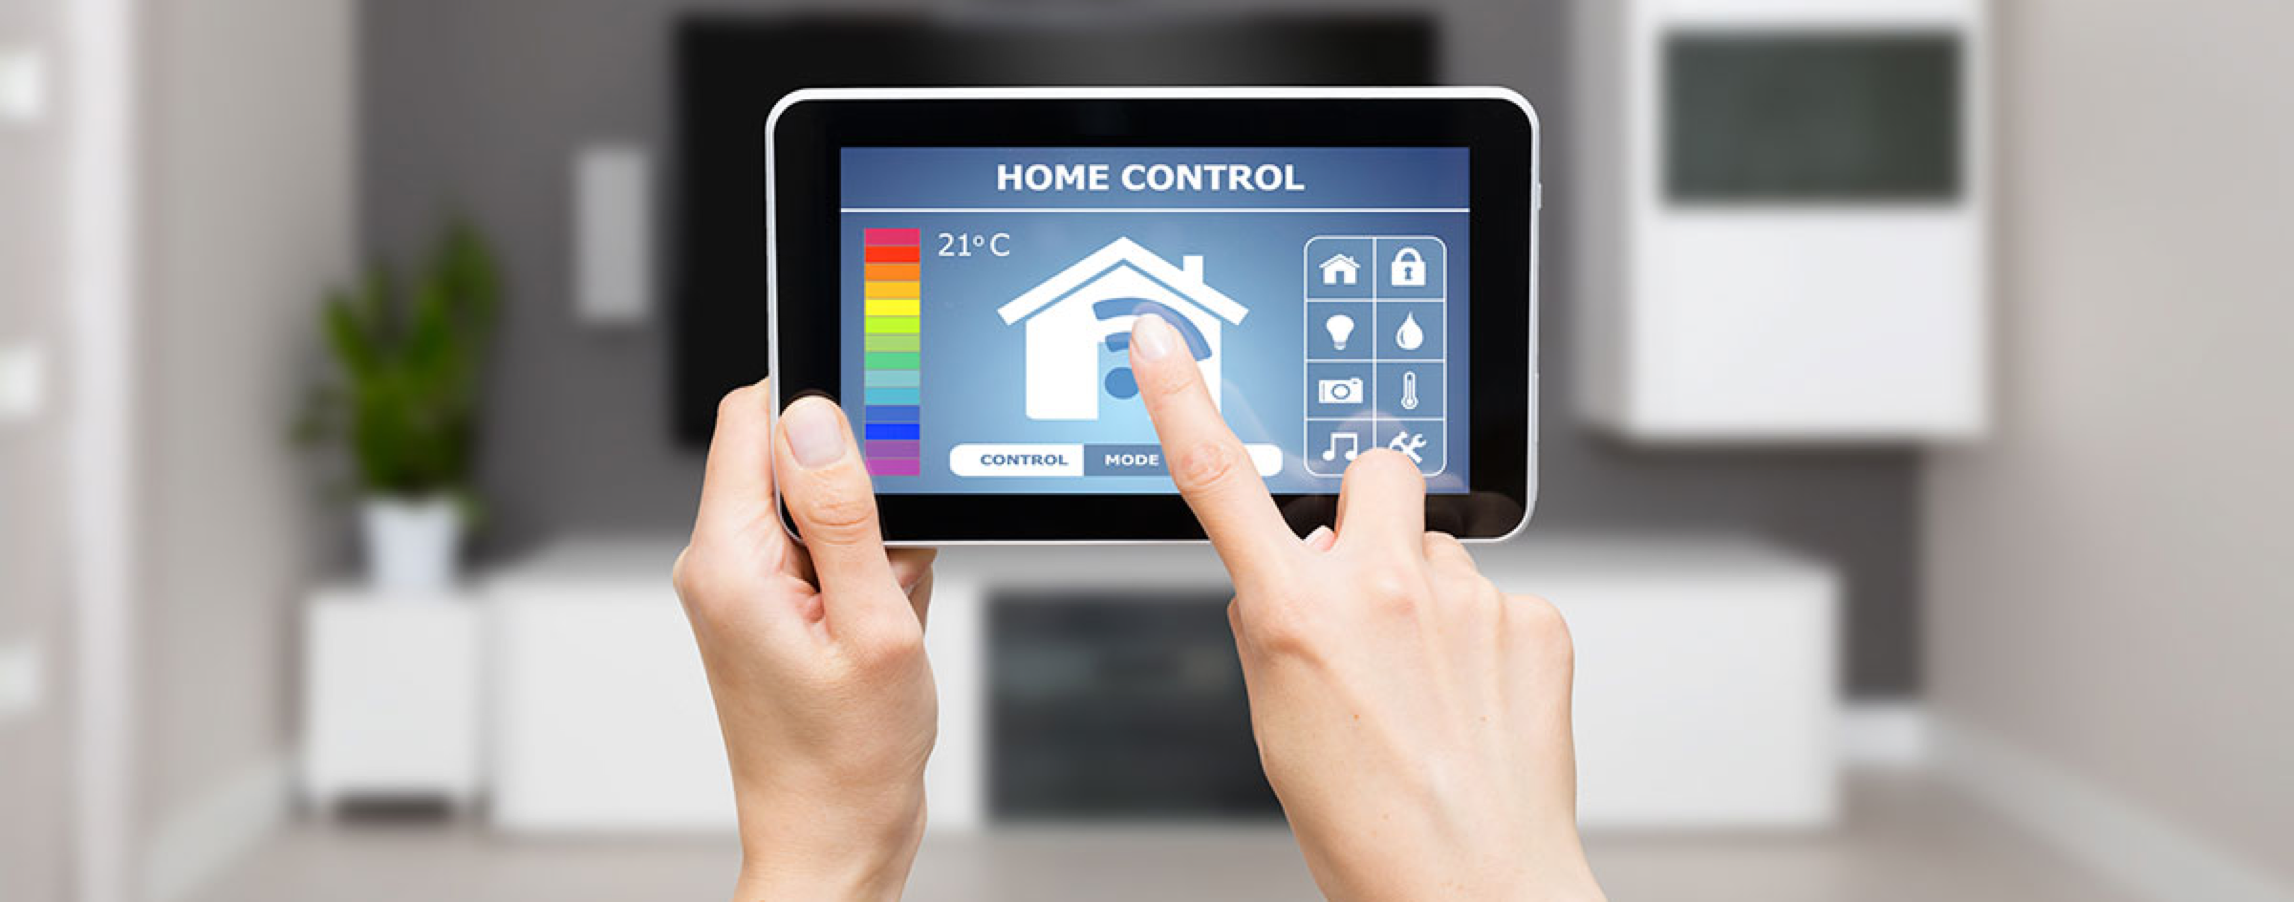 Future Proofing for Smart Homes as an Installer